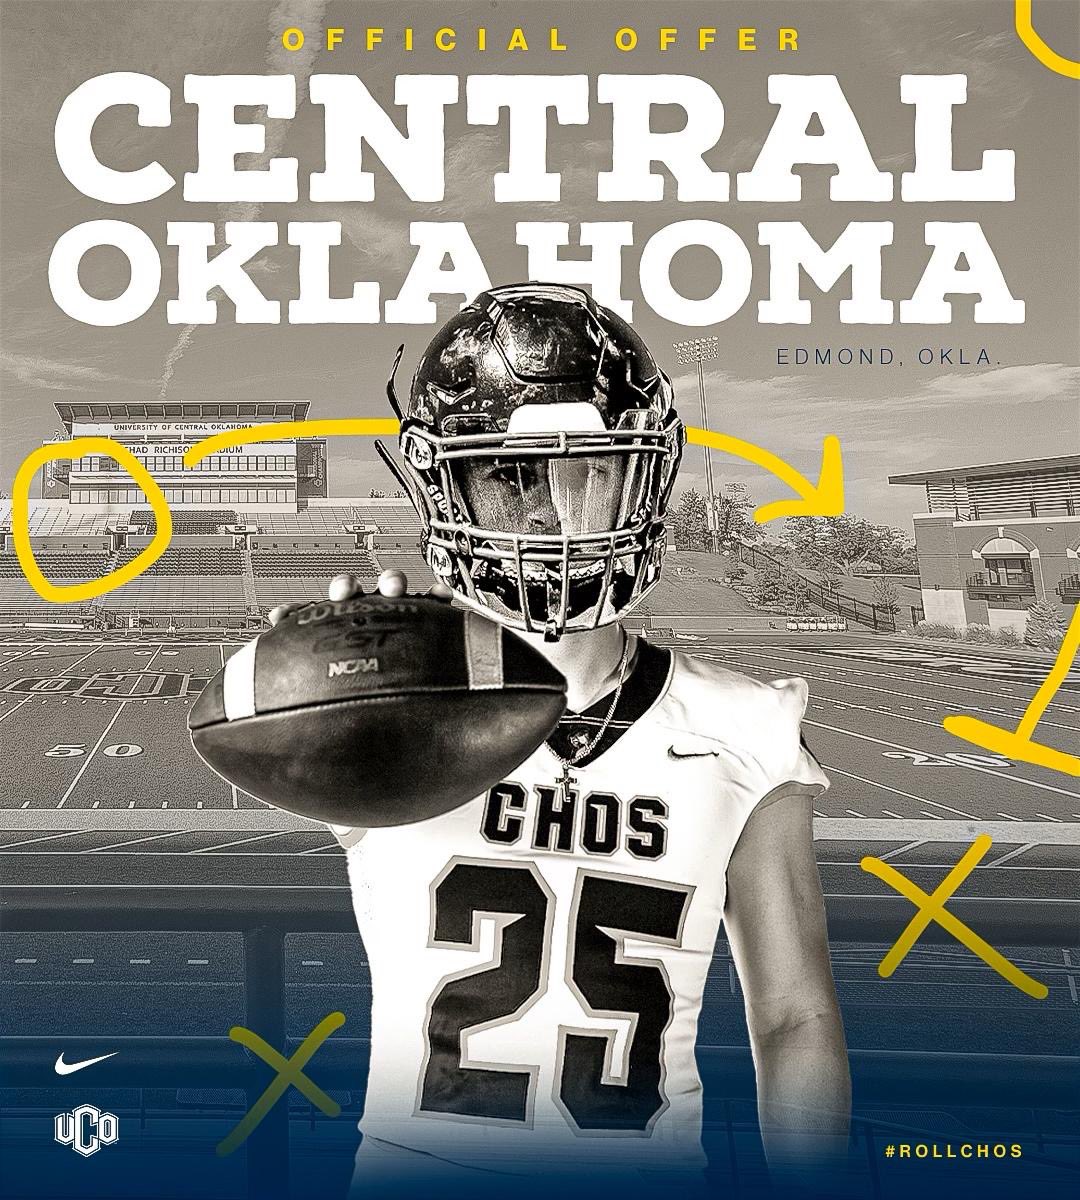 After a great talk with @Coach_TPearson I am blessed receive my first offer from UCO! @Coach_Swanson1 @CoachAdamGaylor @_CoachGreenwood @Coach_JHarding @jaywilkinson @JenksFootball